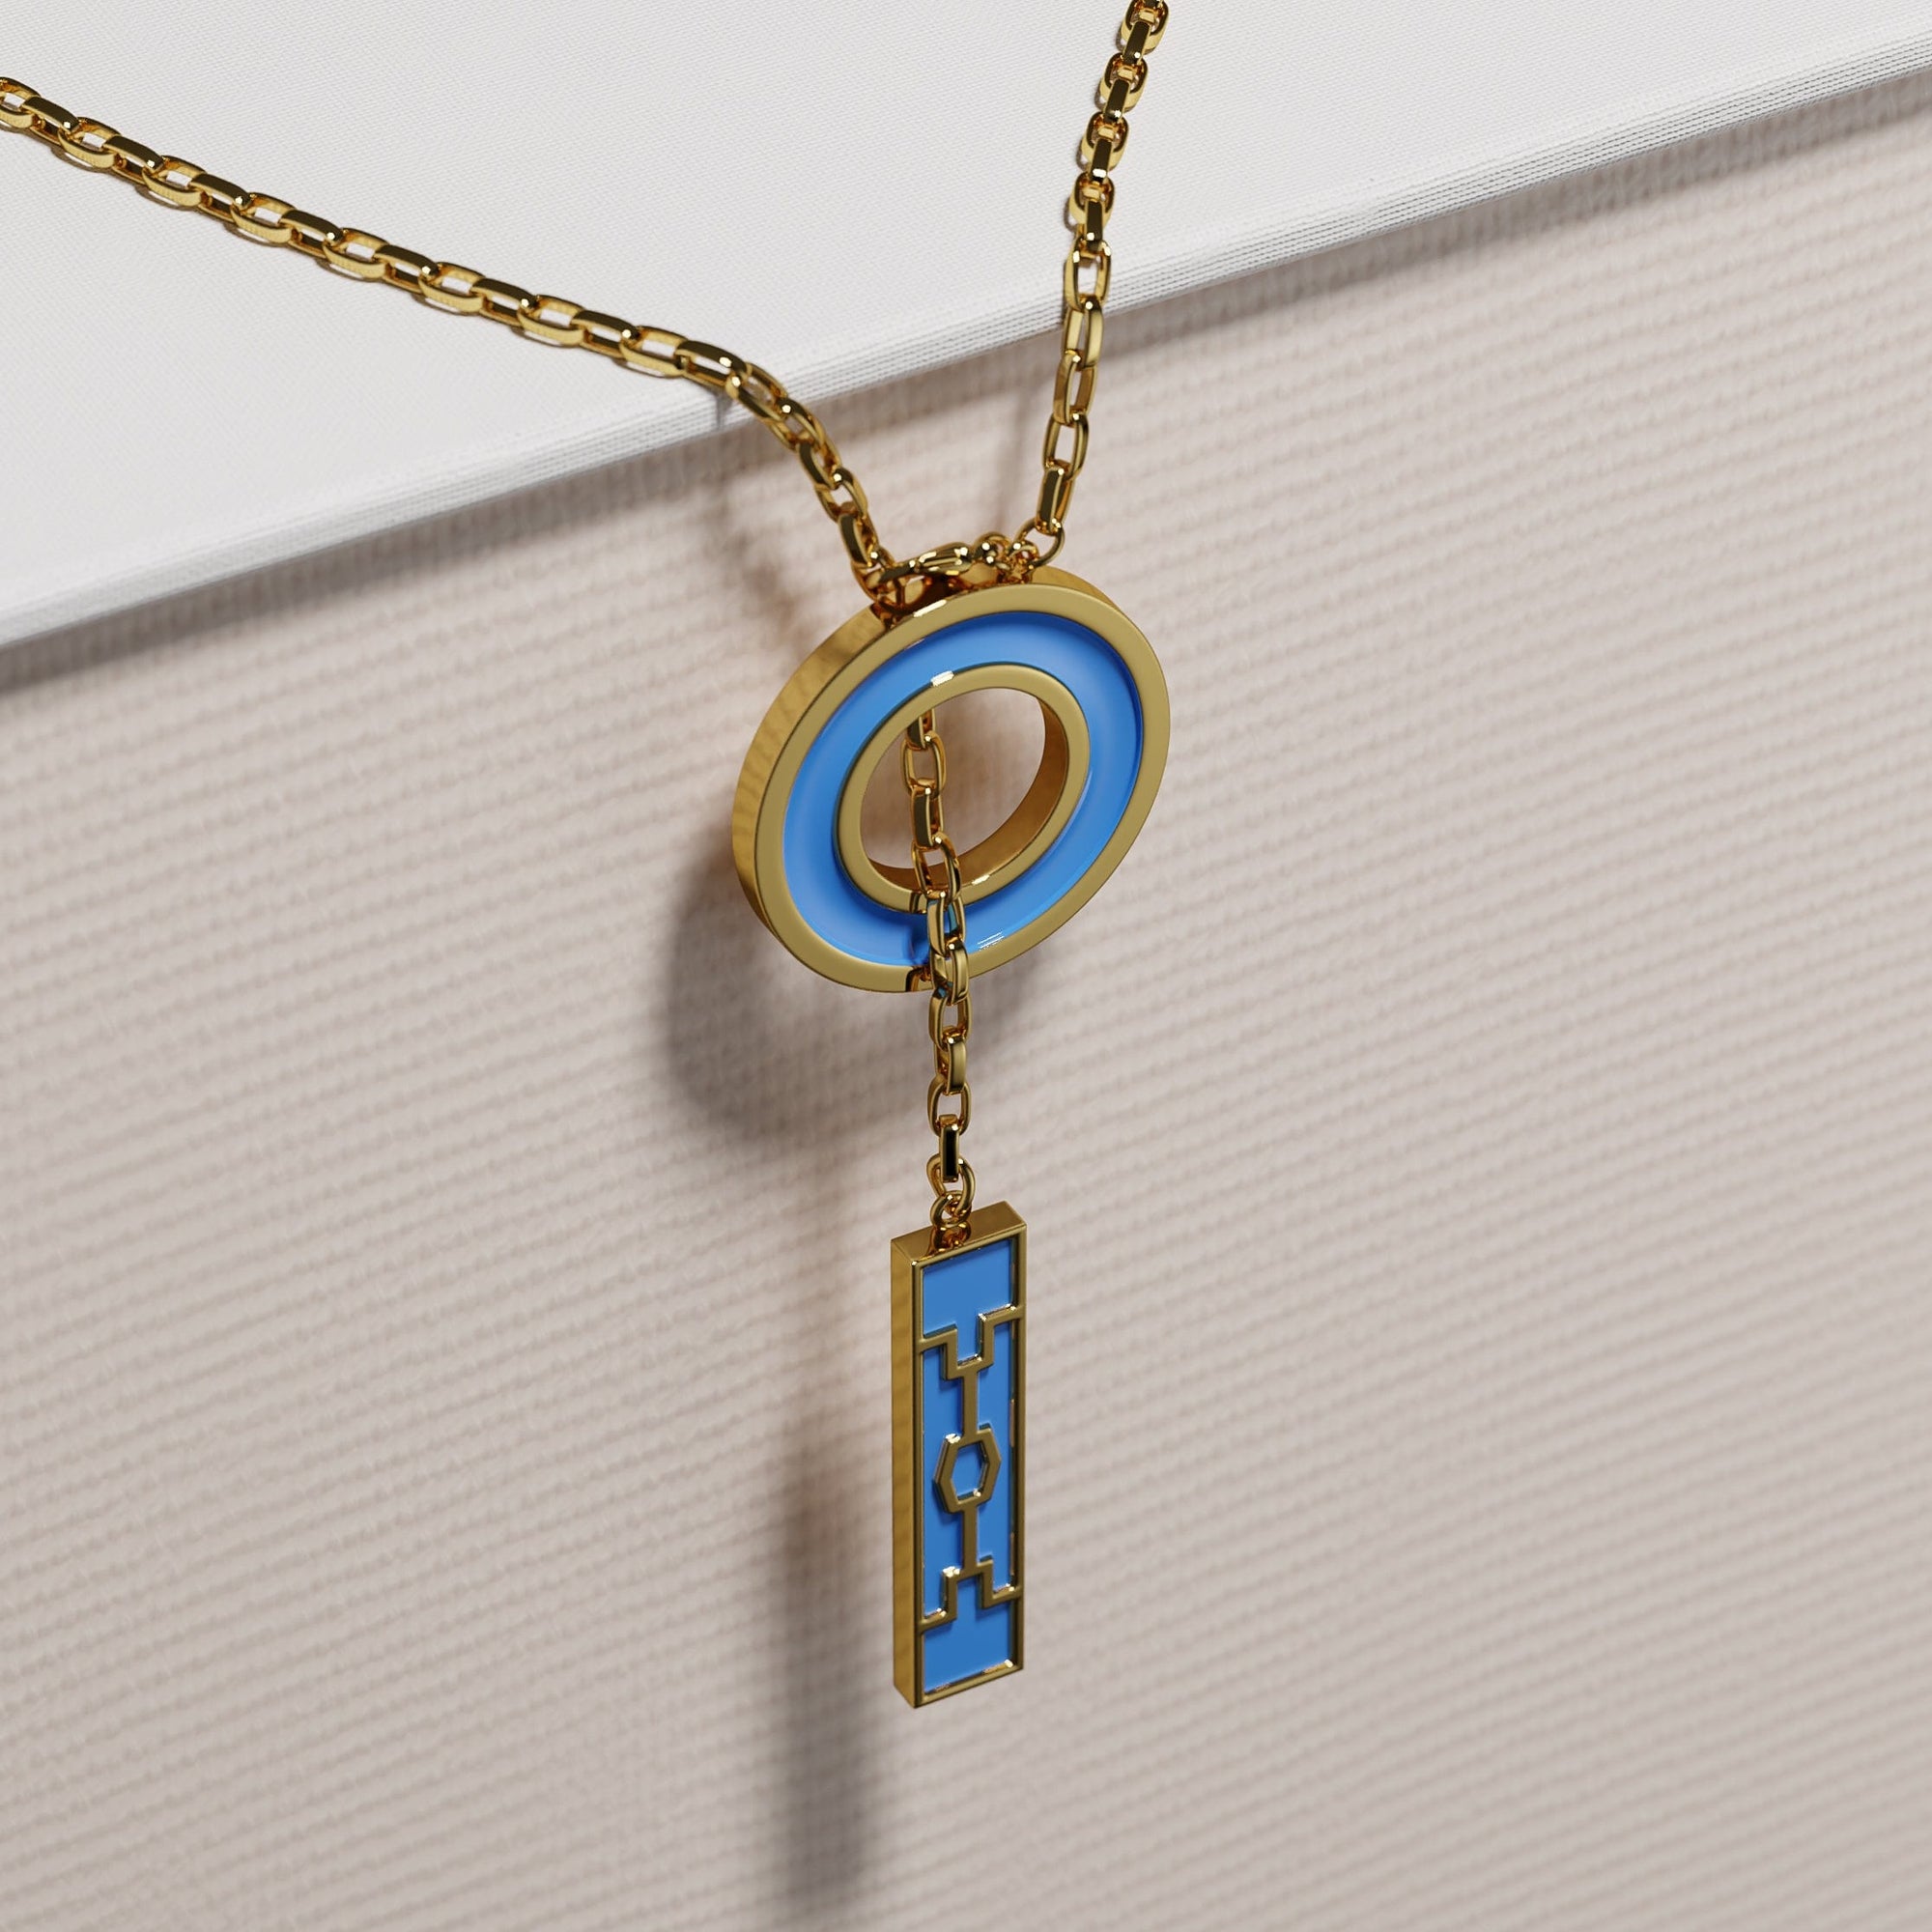 Ndebele Necklace - 14K Gold Plated 3-IN-1 Jewelry